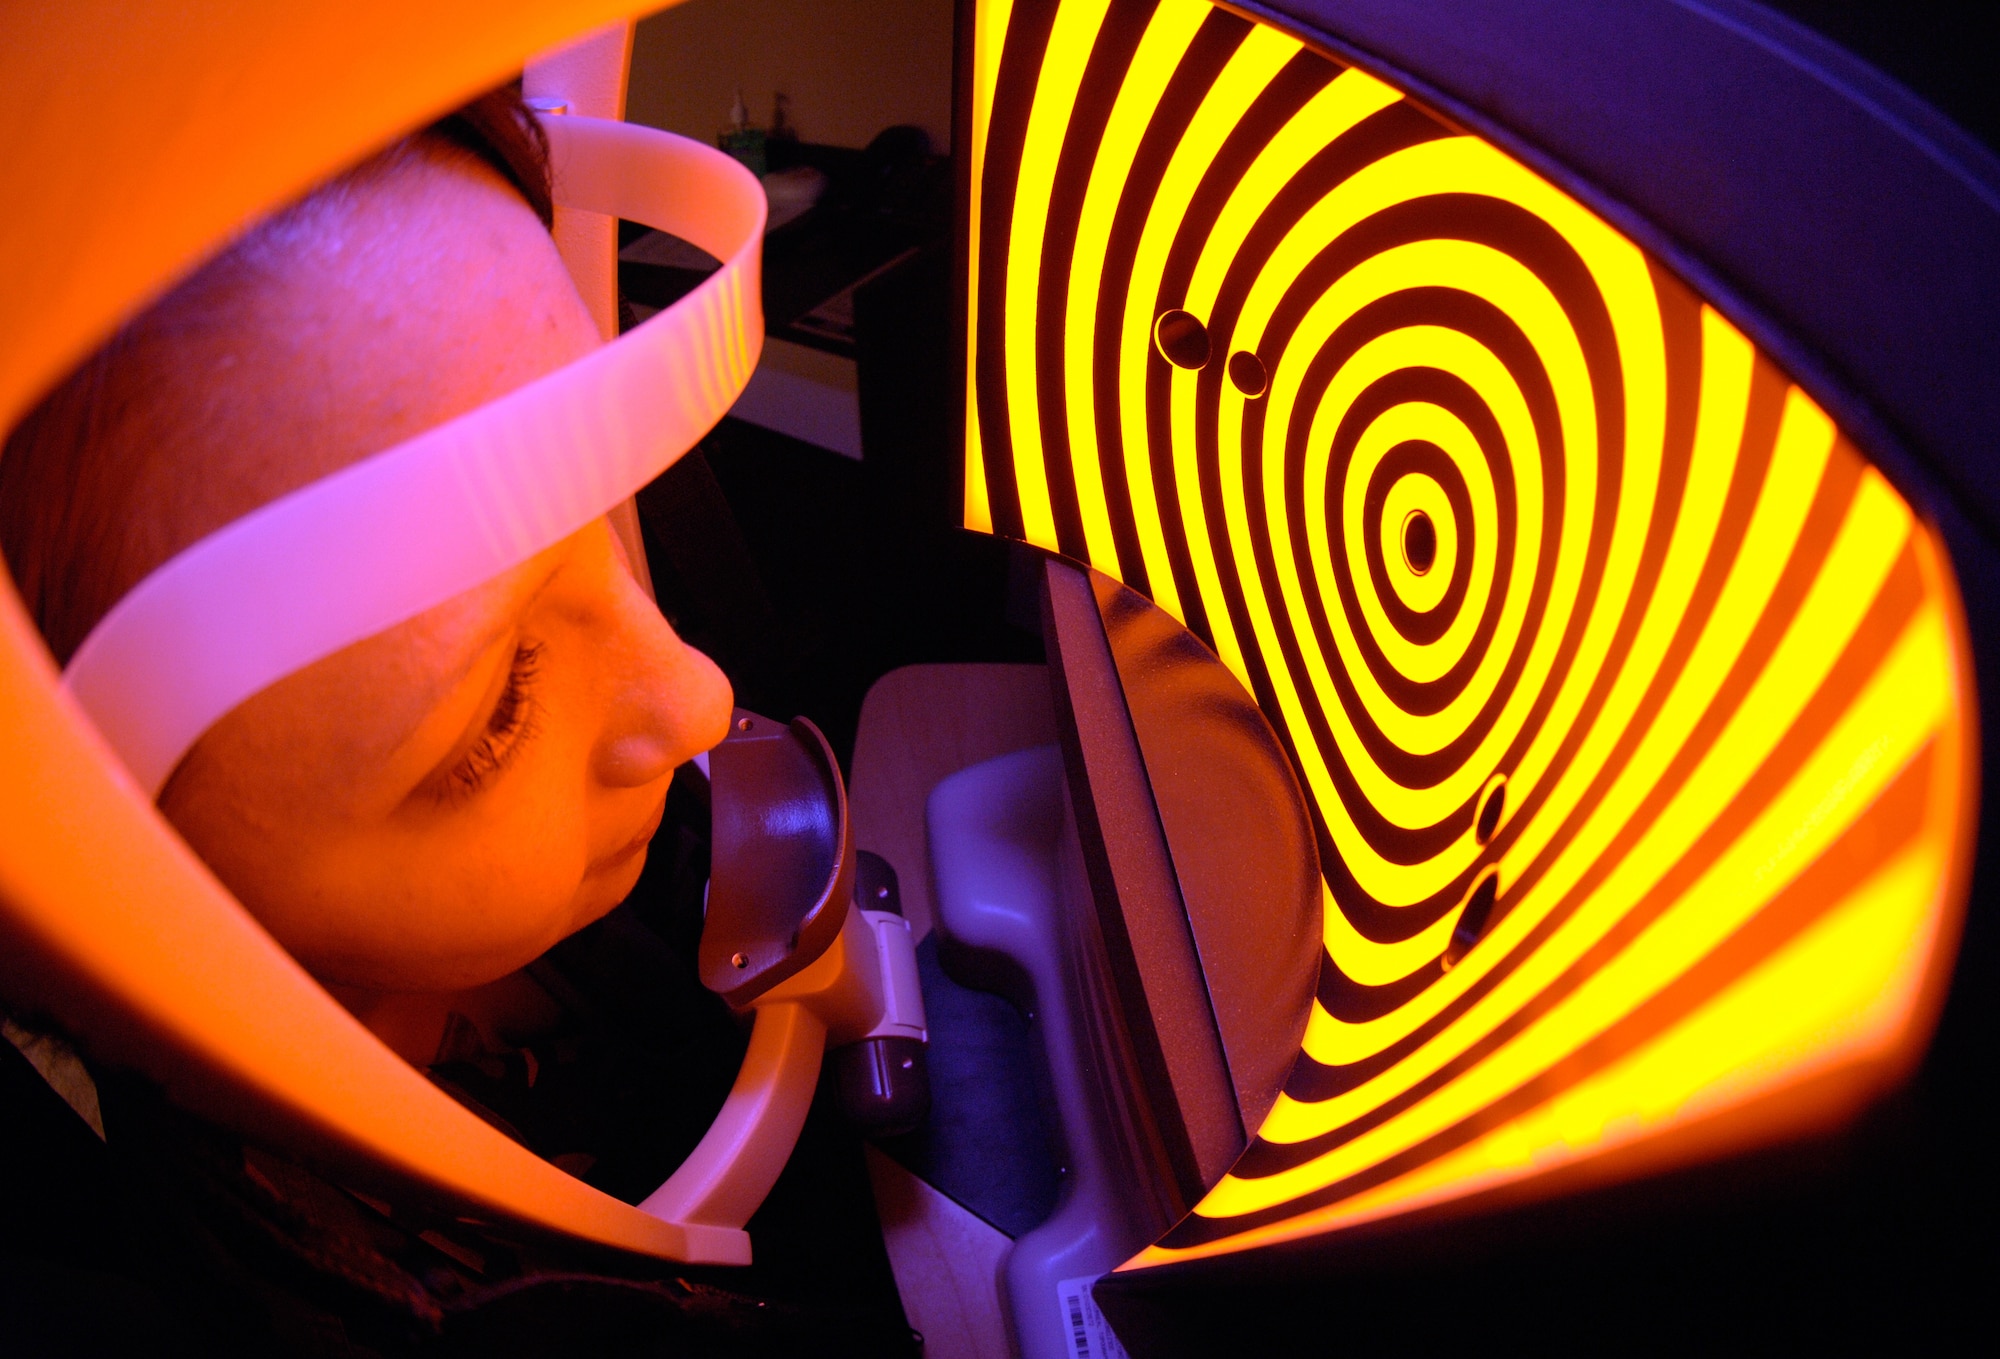 A patient recieves an orbscan using ultra sound to make an elevation map of her eyes at the Joint Refractive Surgery Center, Lackland Air Force Base, Texas, on March 28. An orbscan is one of the many tests an individual must go through to determine if they are a good canidate for laser eye surgery. (U.S. Air Force photo/Master Sgt. Kimberly A. Yearyean-Siers)